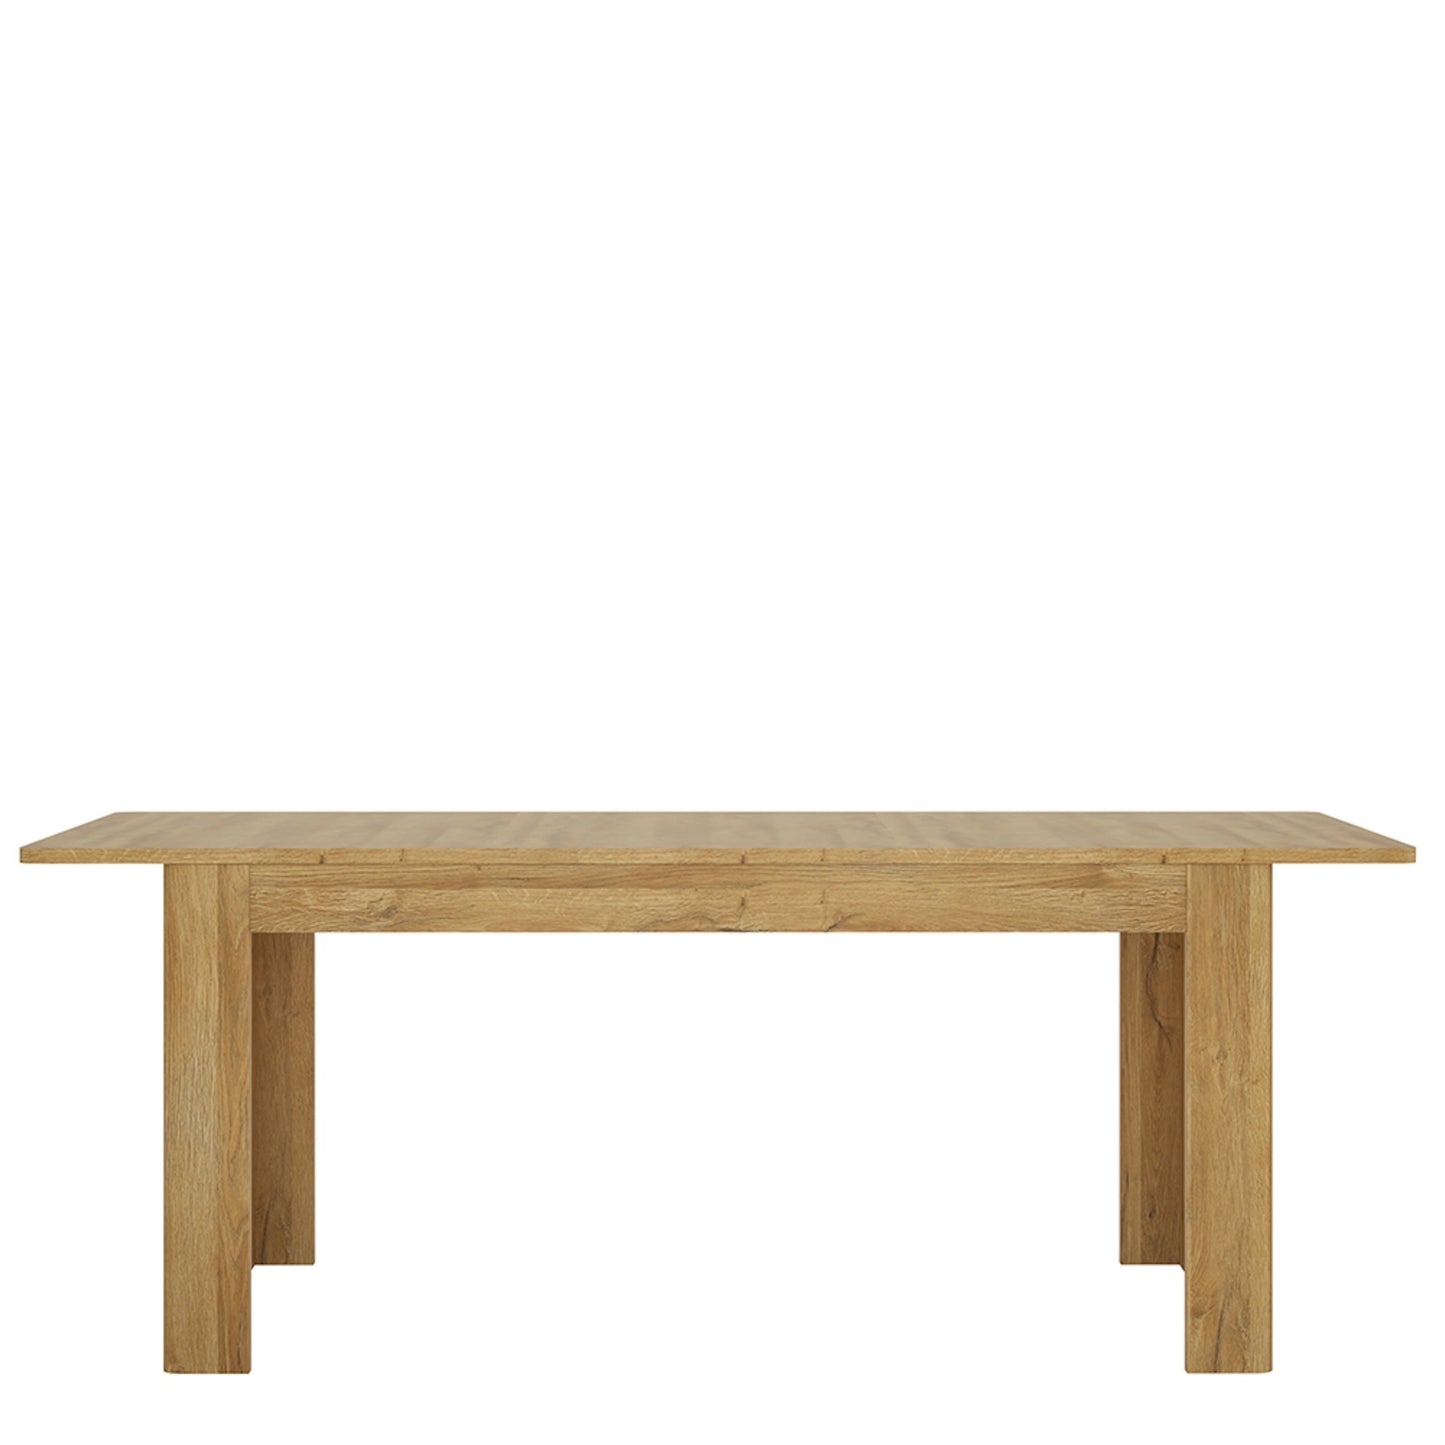 Furniture To Go Cortina Extending Dining Table in Grandson Oak